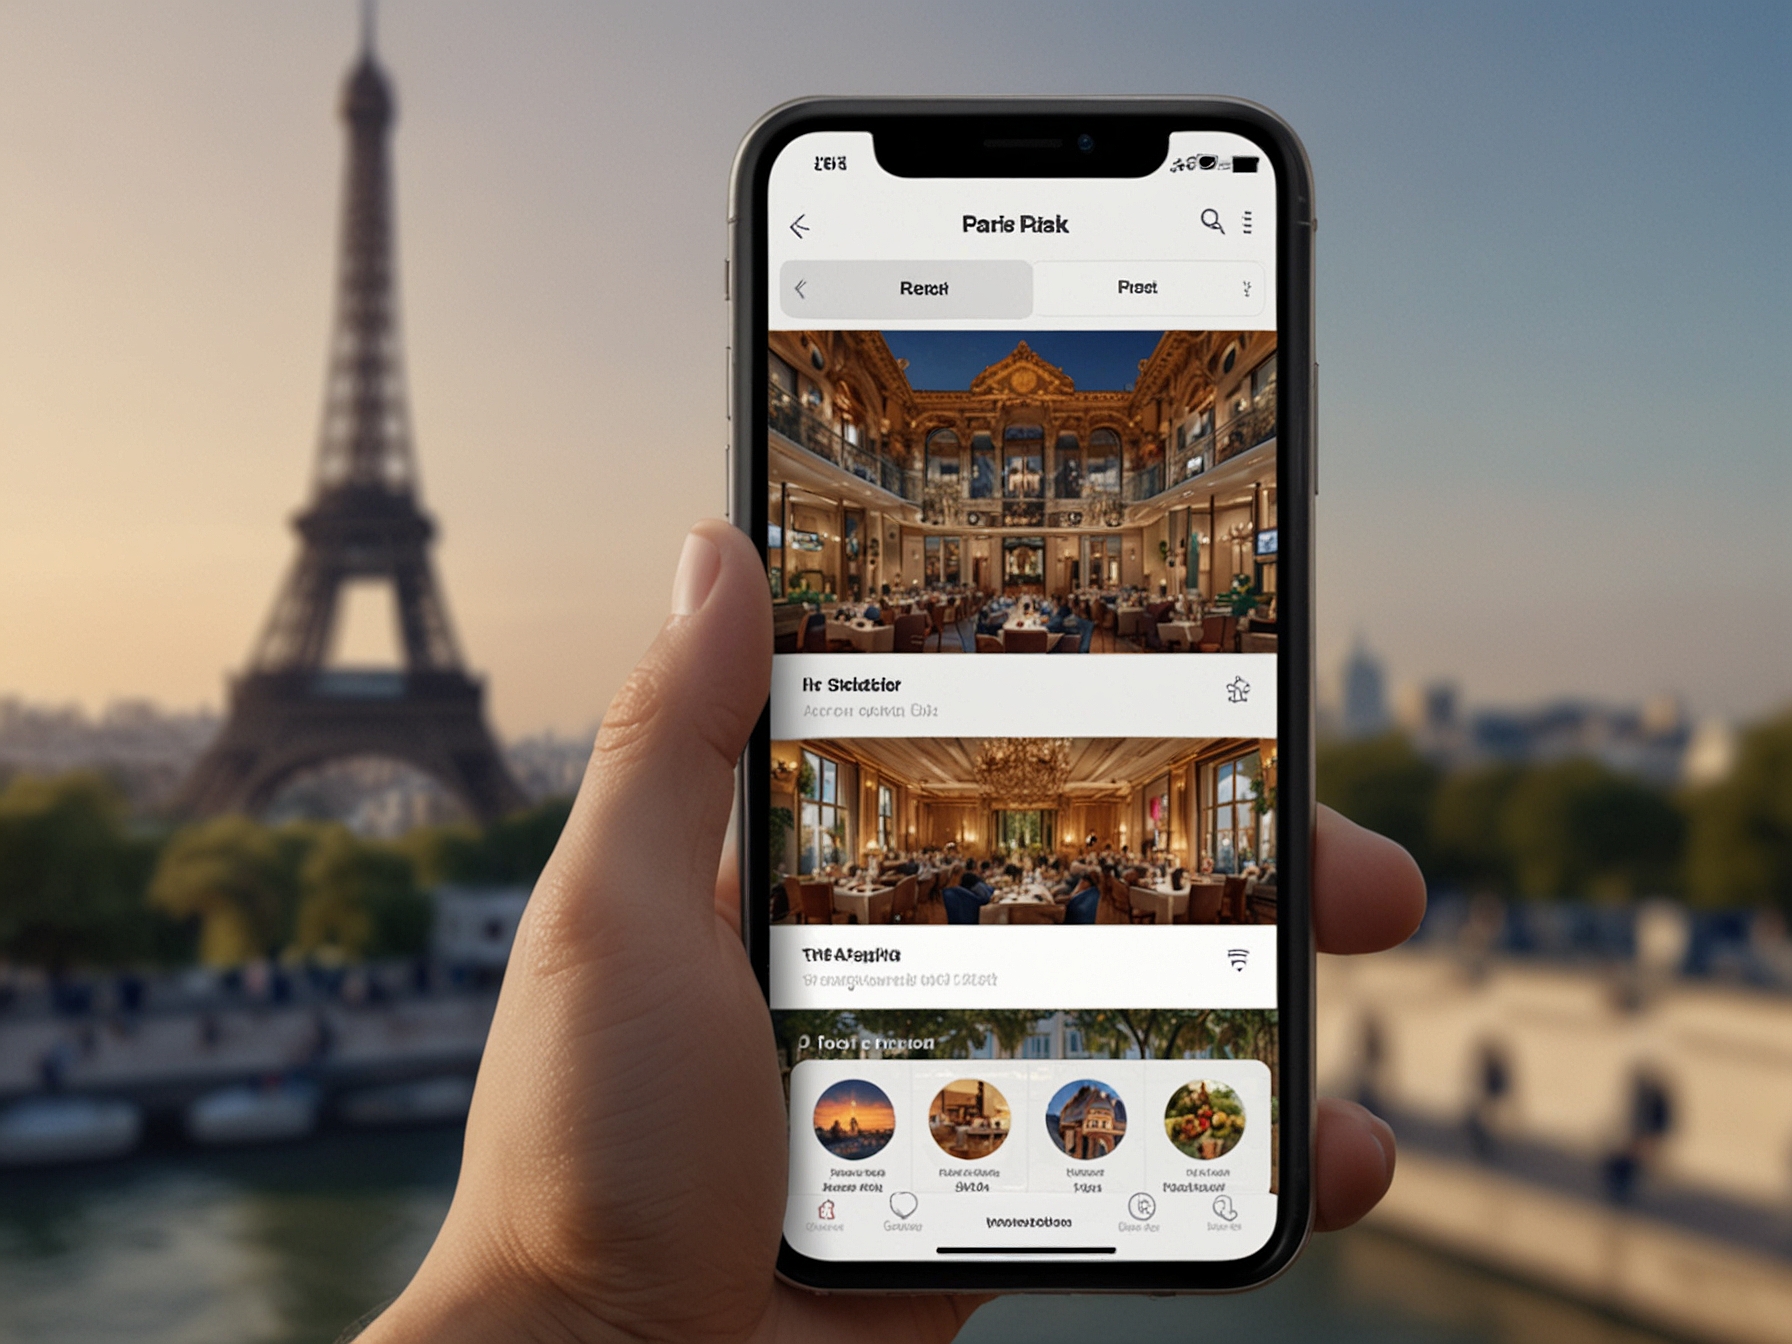 A preview of Accor's custom app for Paris 2024 attendees, featuring real-time event updates, personalized dining and sightseeing recommendations, and user-friendly interface.